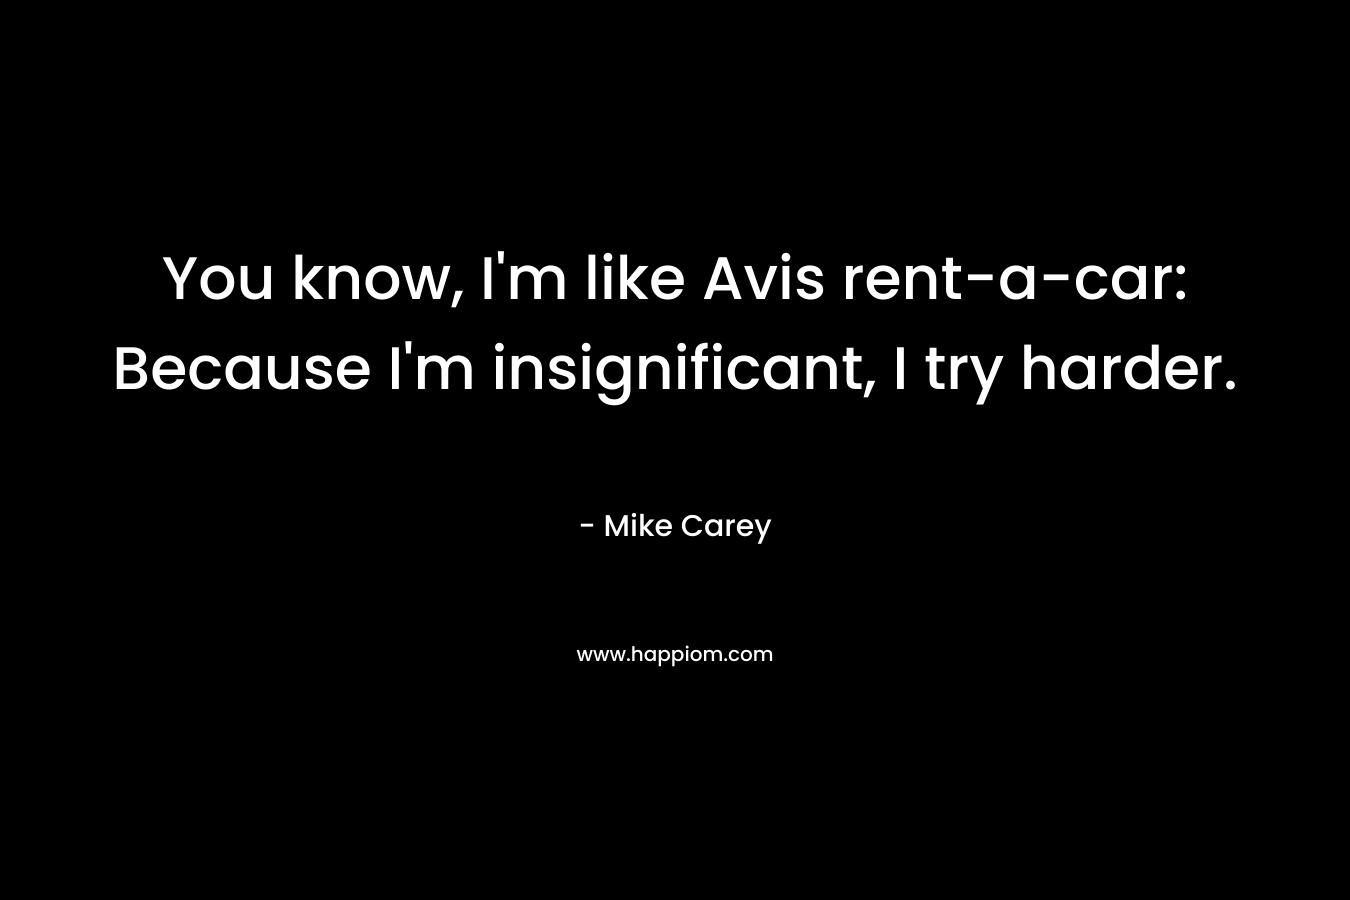 You know, I’m like Avis rent-a-car: Because I’m insignificant, I try harder. – Mike Carey